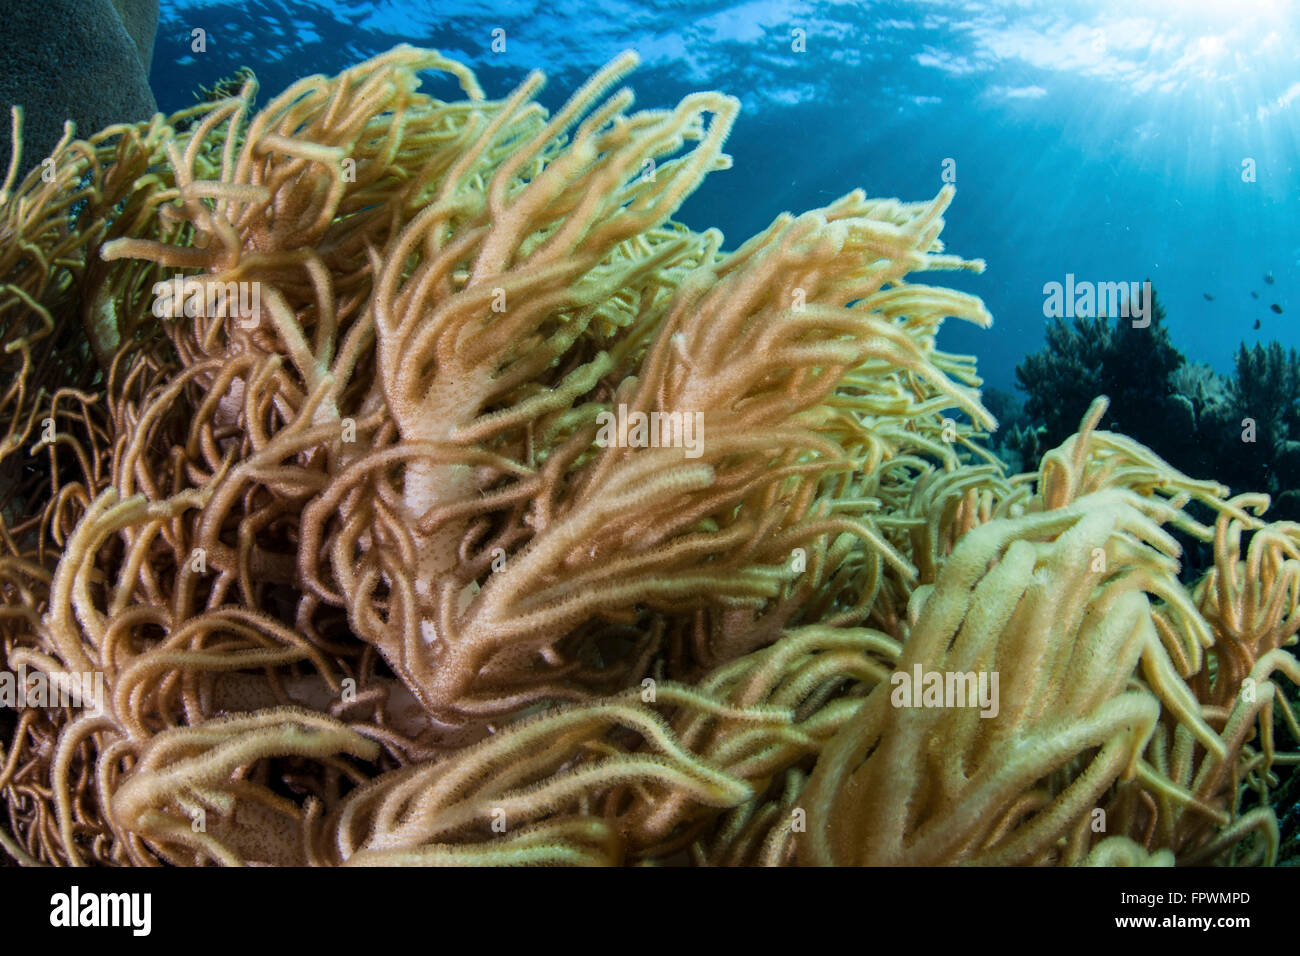 A soft coral colony (Sinularia sp.) grows on a diverse reef in Indonesia. This family of corals does not fuse to the seafloor. T Stock Photo